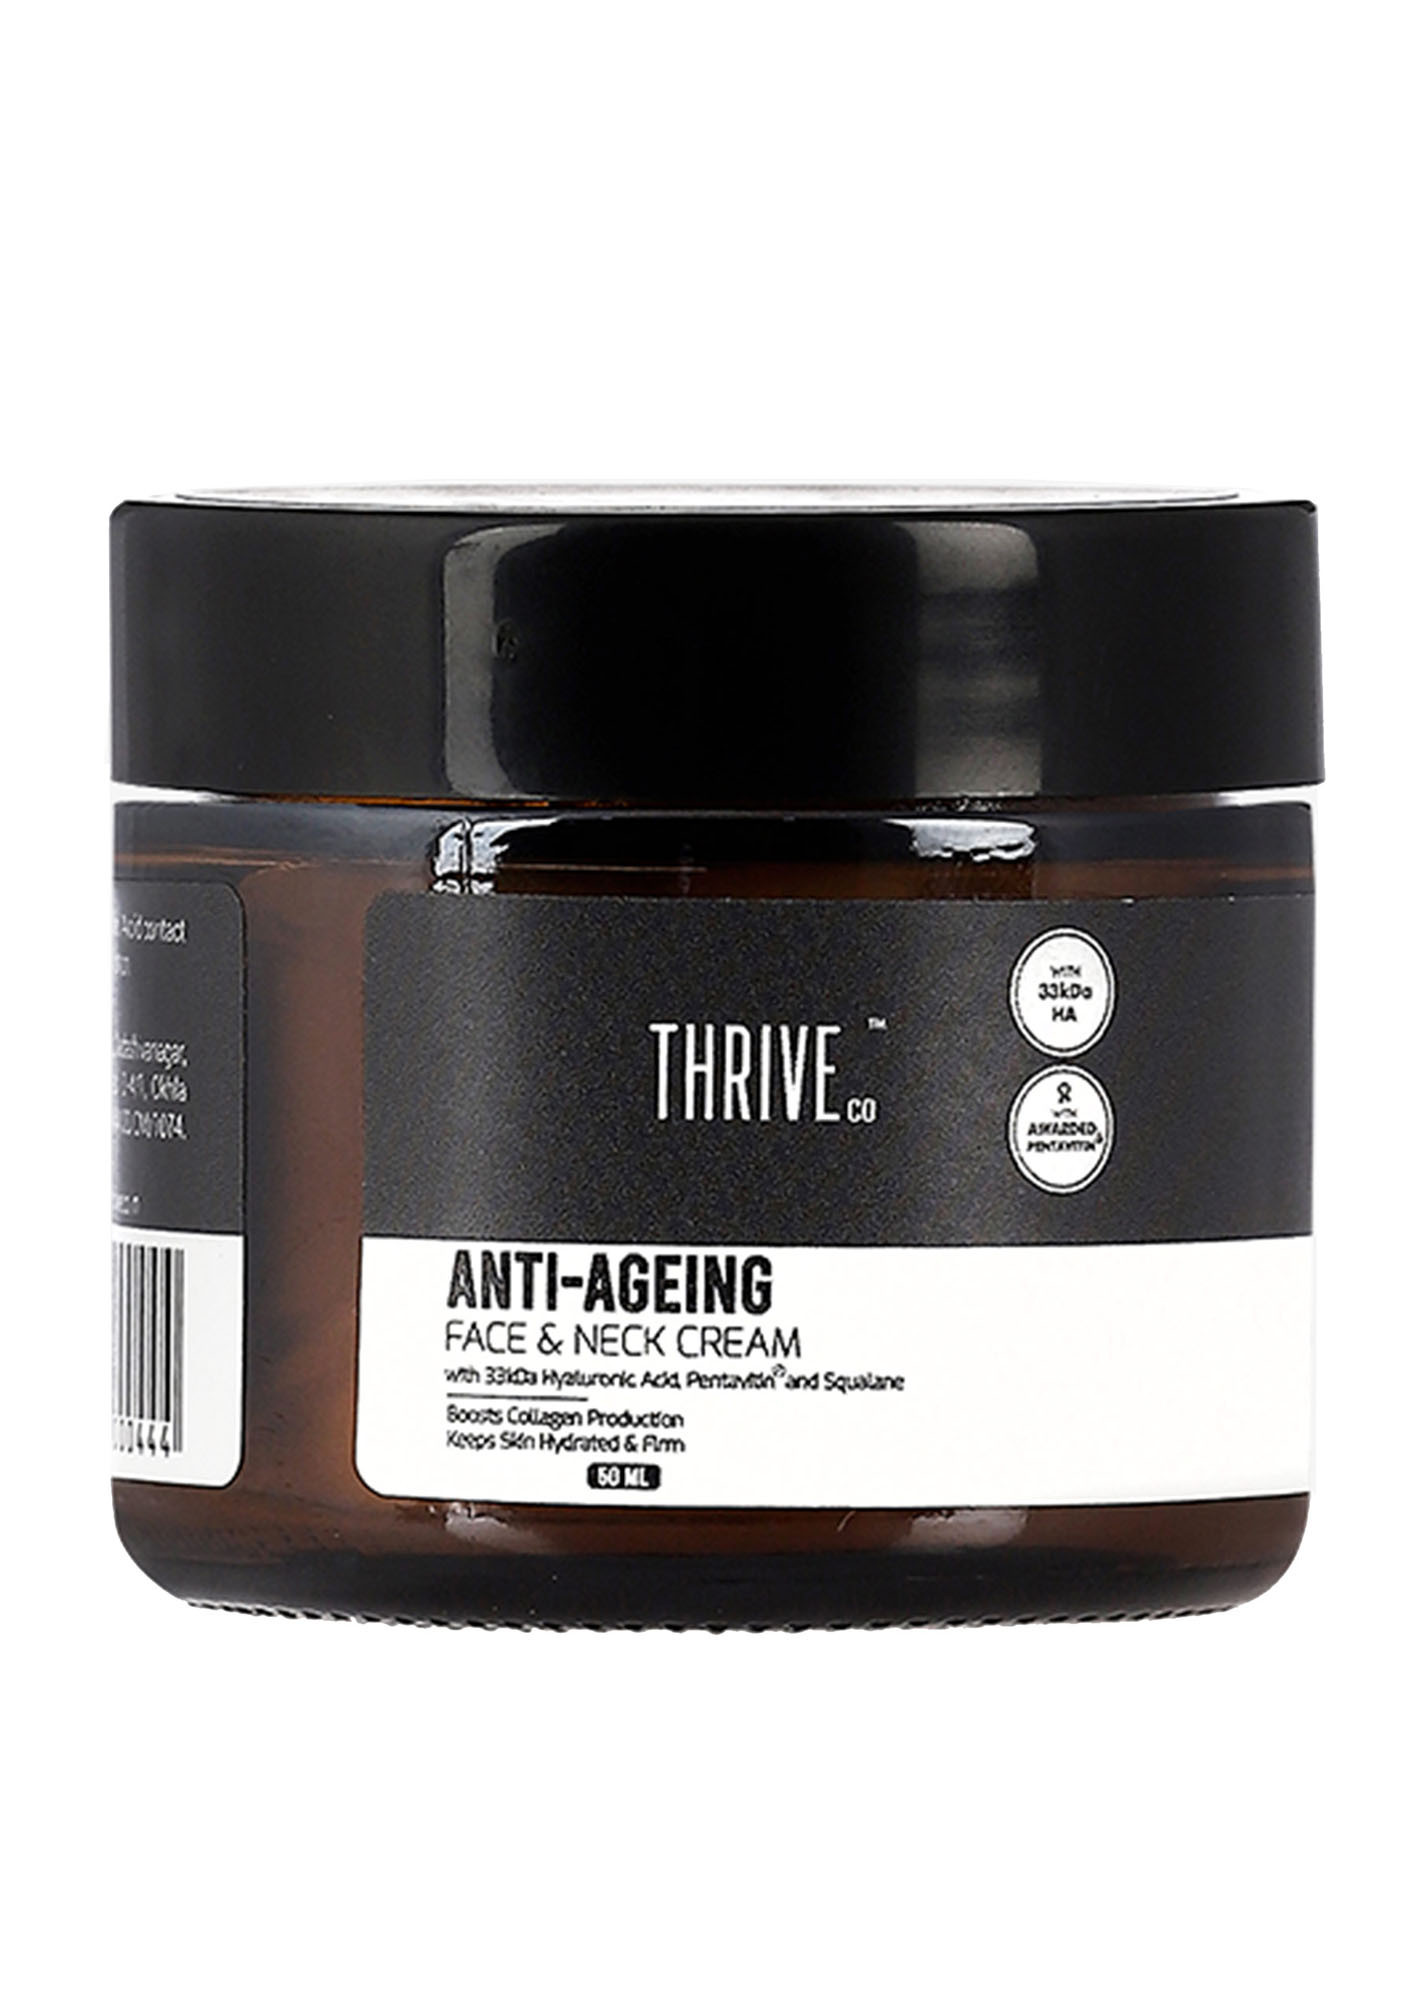 ThriveCo Anti-Ageing Face & Neck Cream: For Plumping, Radiating, Collagen Boosting Skin Care